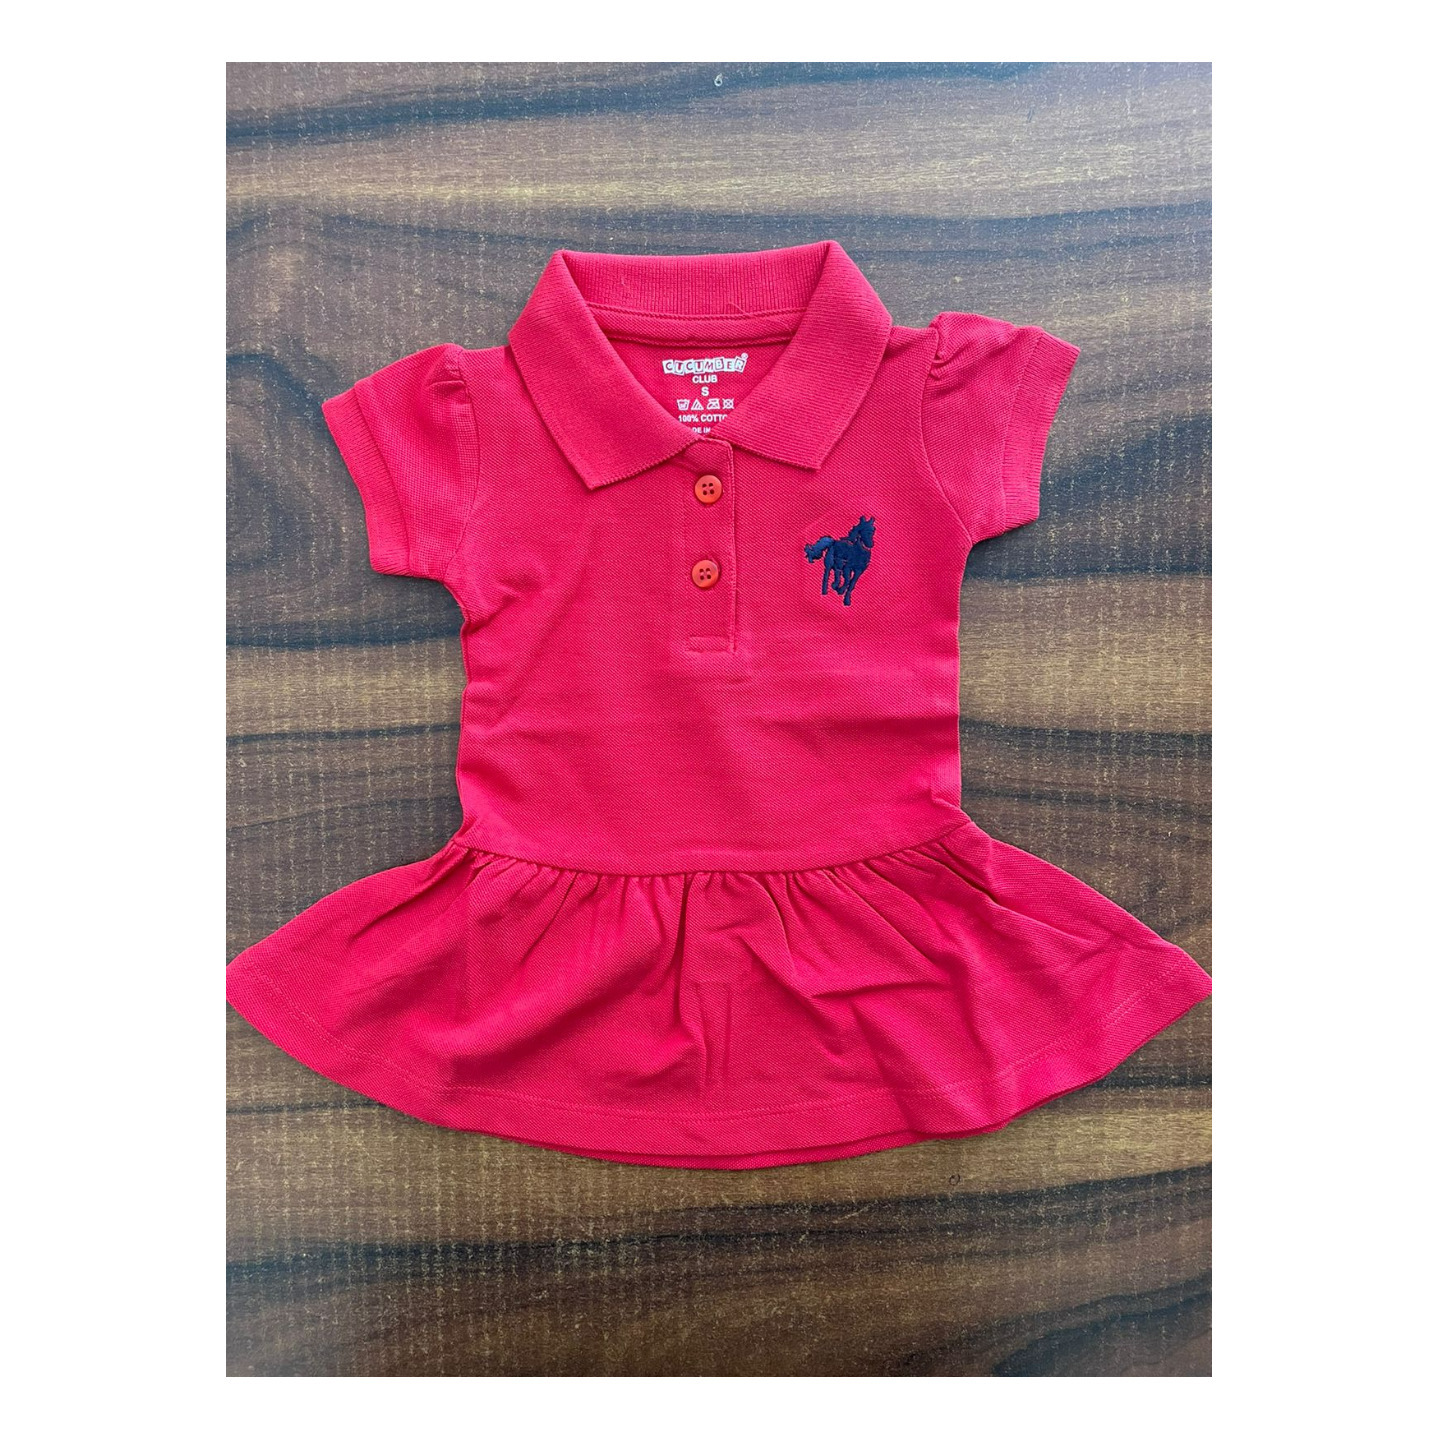 Cucumber Half Sleeves Collar Frock Rs 250 only Small Size 0 to 6 Months